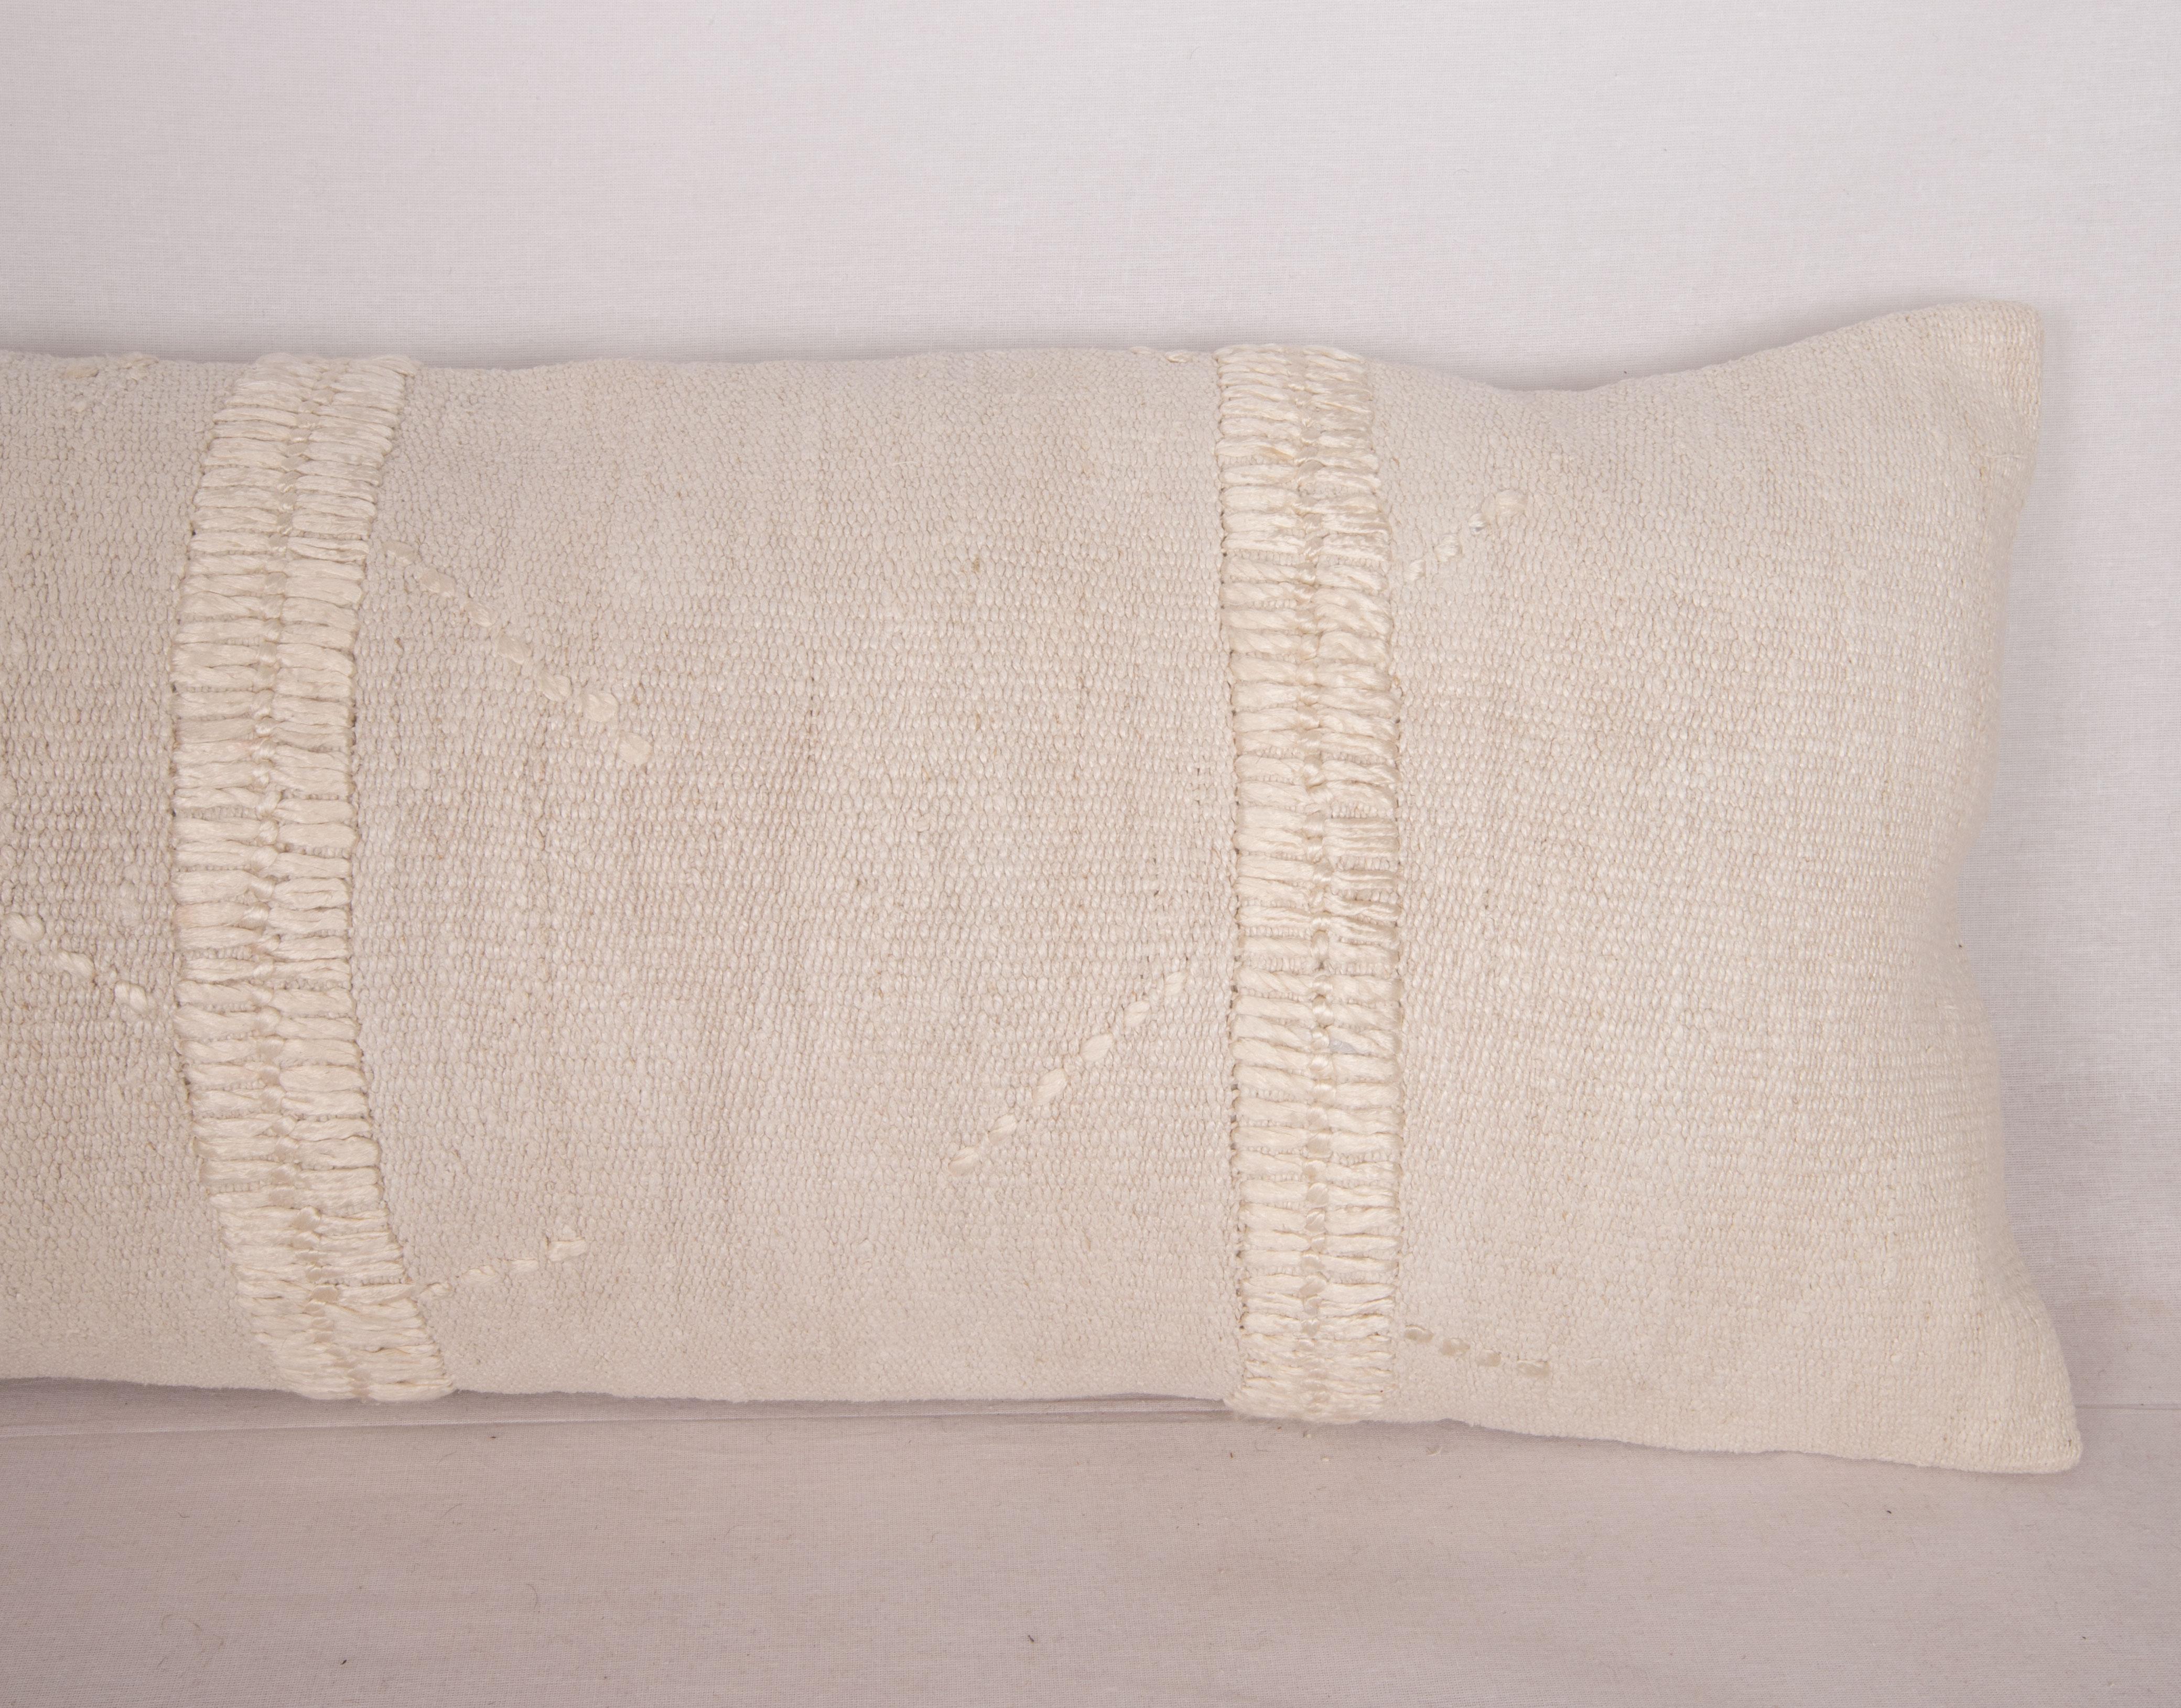 Body Pillow Cover, Made from a Vintage Hemp Kilim, Mid 20th C In Good Condition For Sale In Istanbul, TR